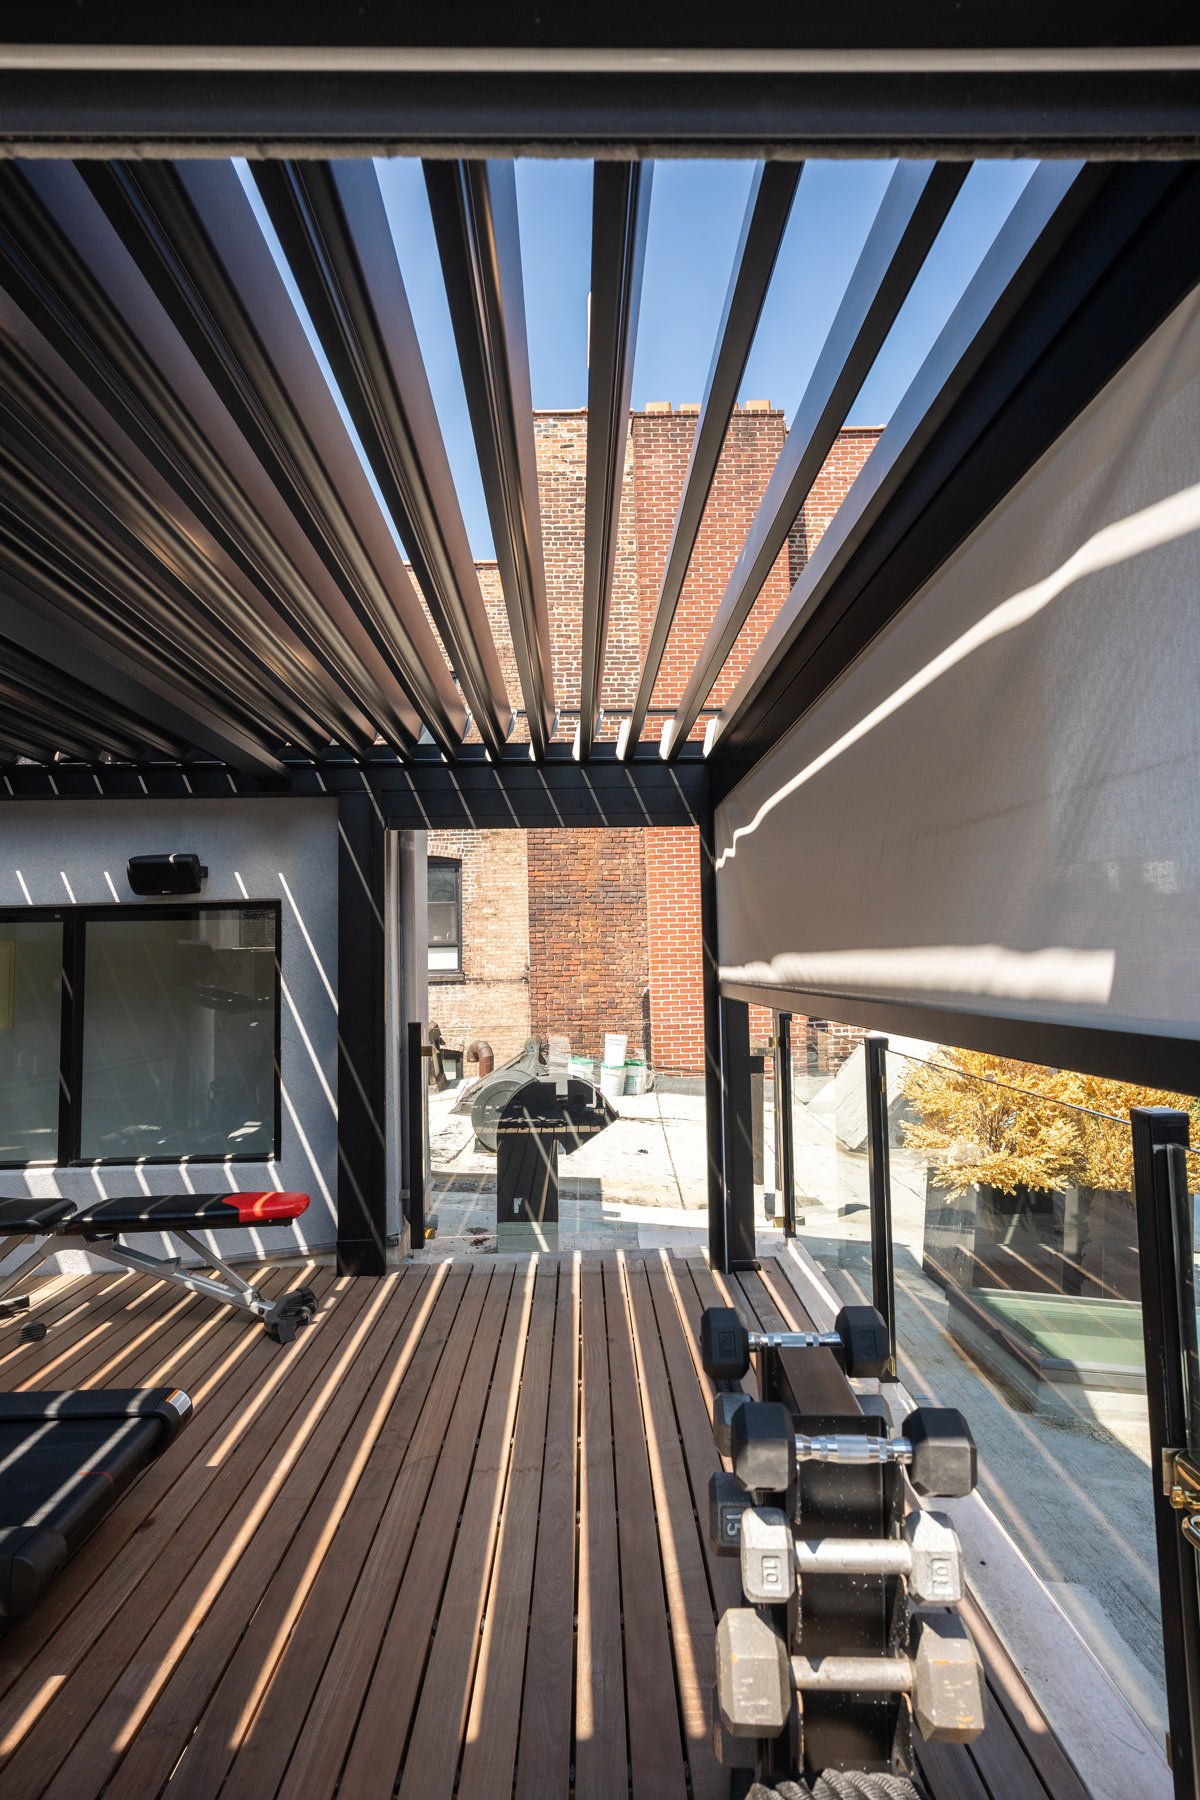 Eli louvered roof